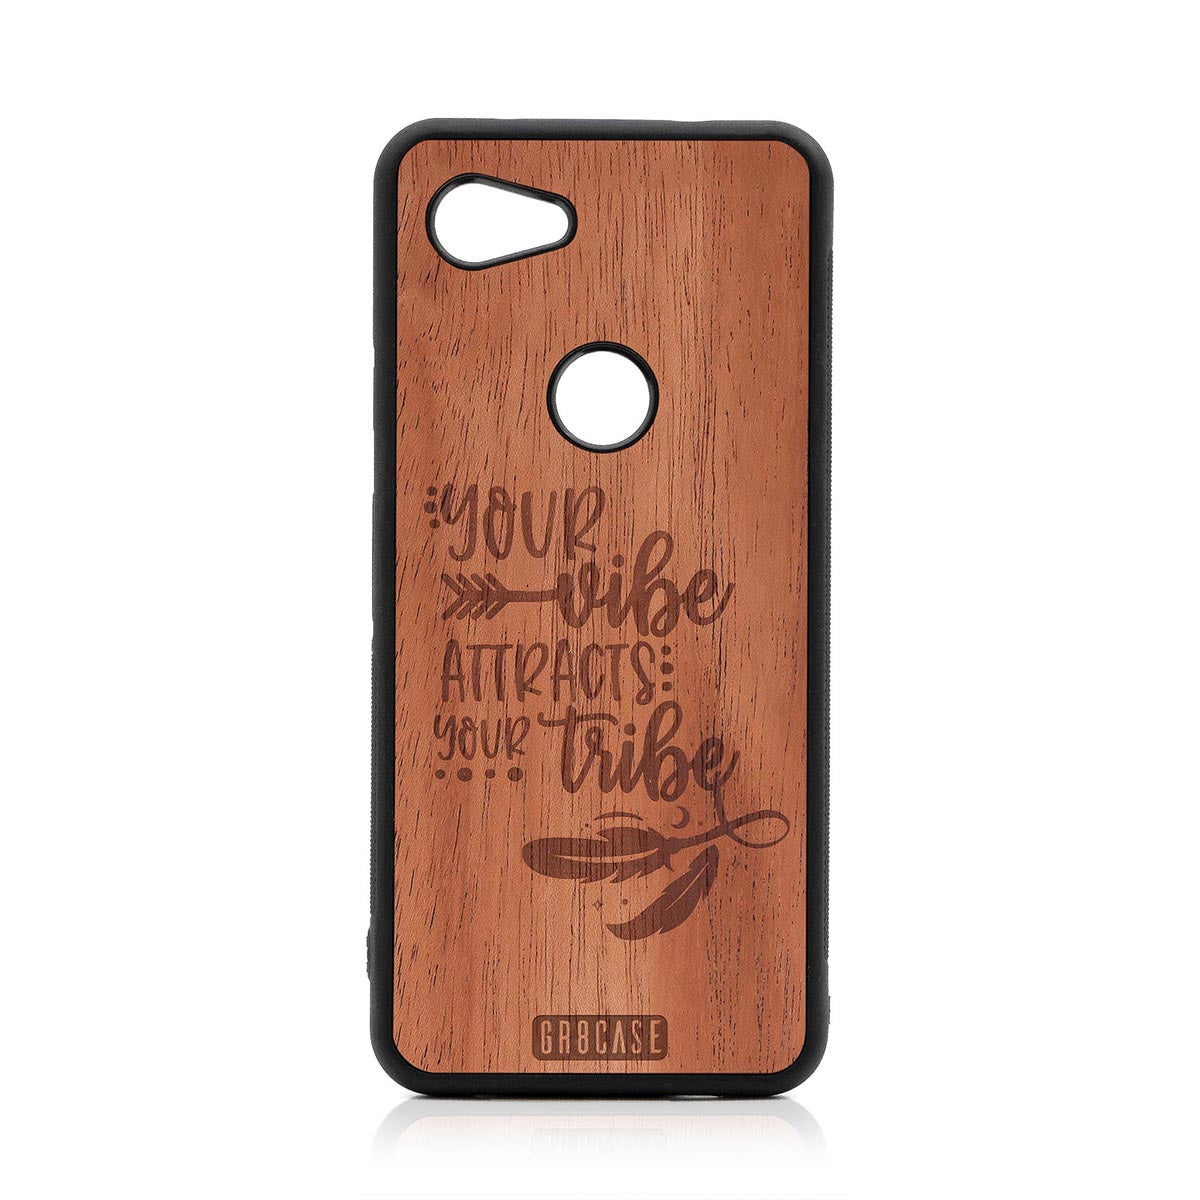 Your Vibe Attracts Your Tribe Design Wood Case Google Pixel 3A XL